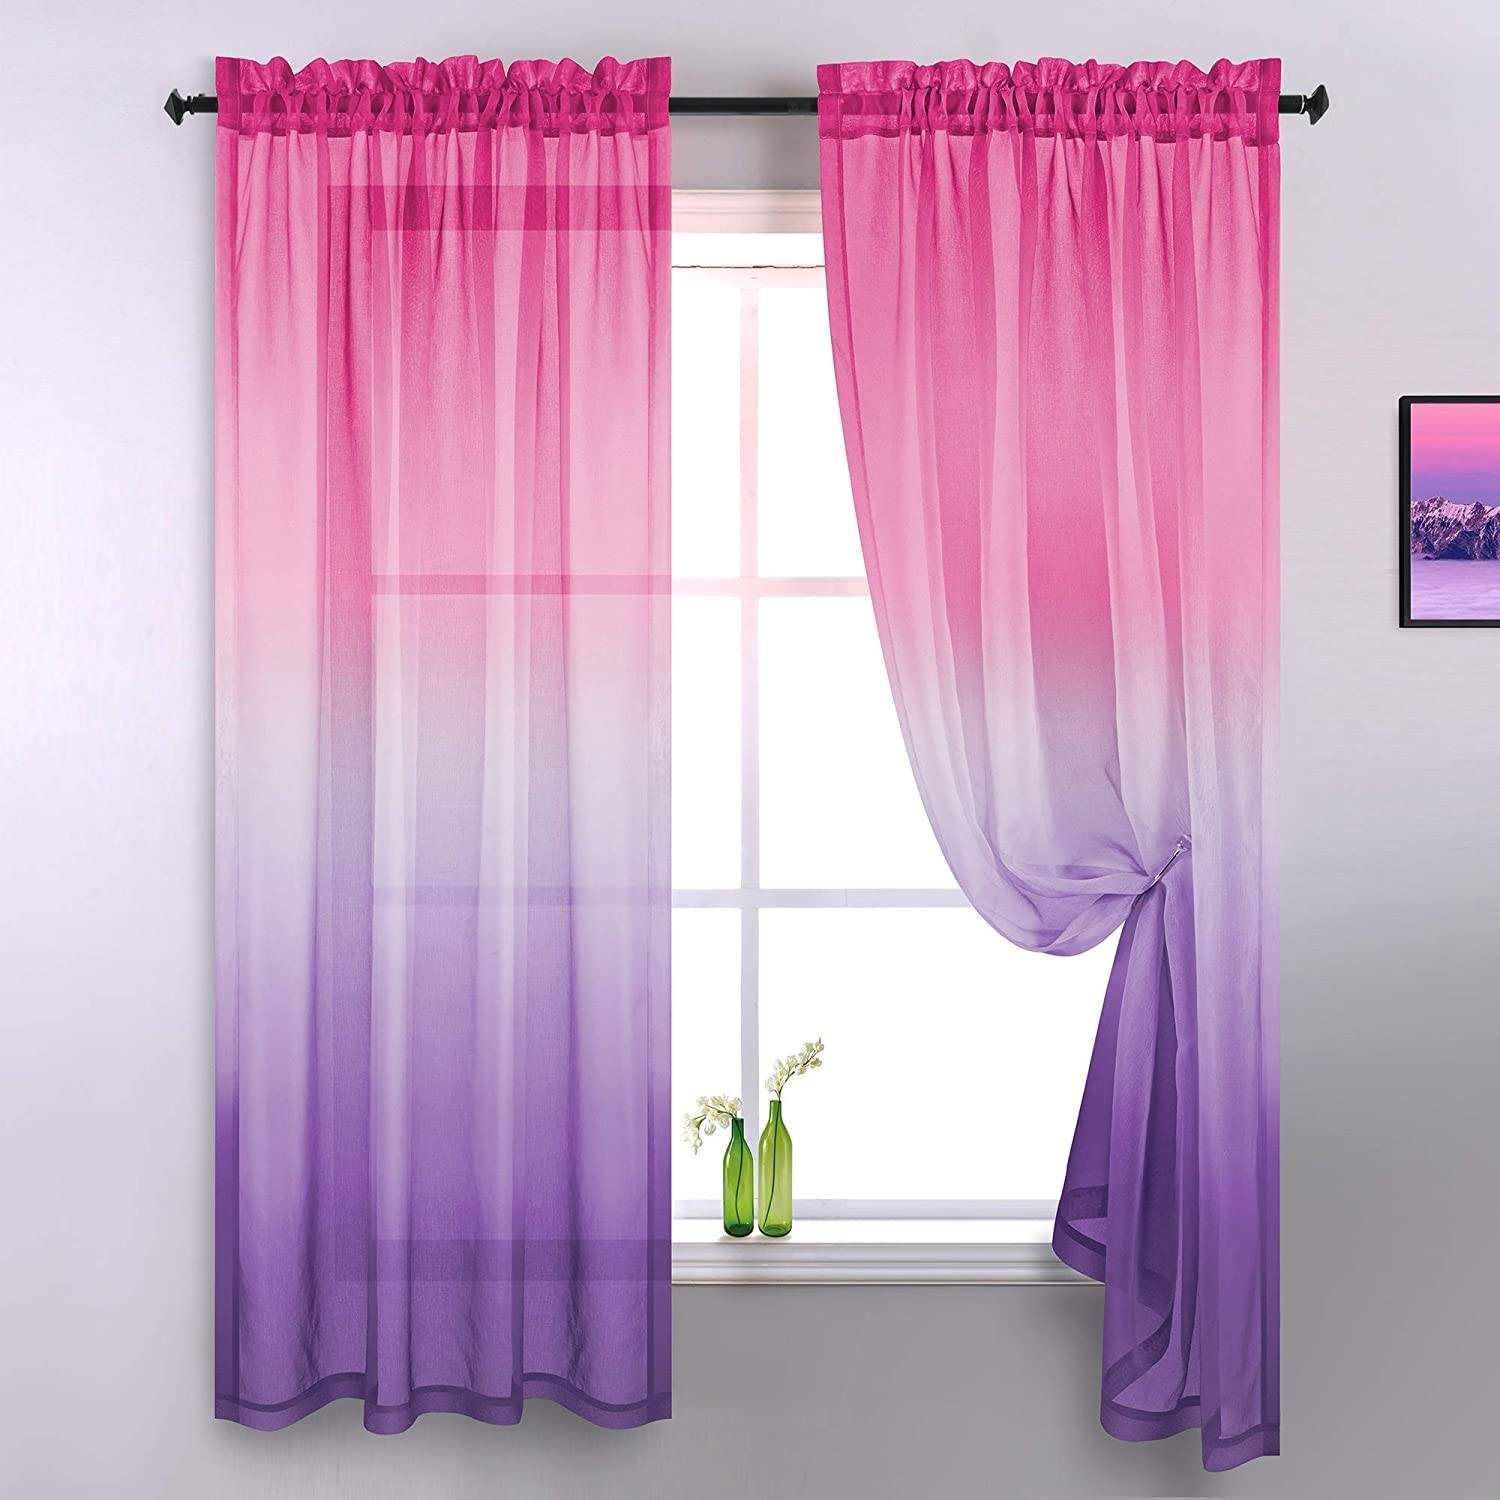 green-bottles-with-flowers-on-window-having-pink-and-purple-curtain-77985.jpg